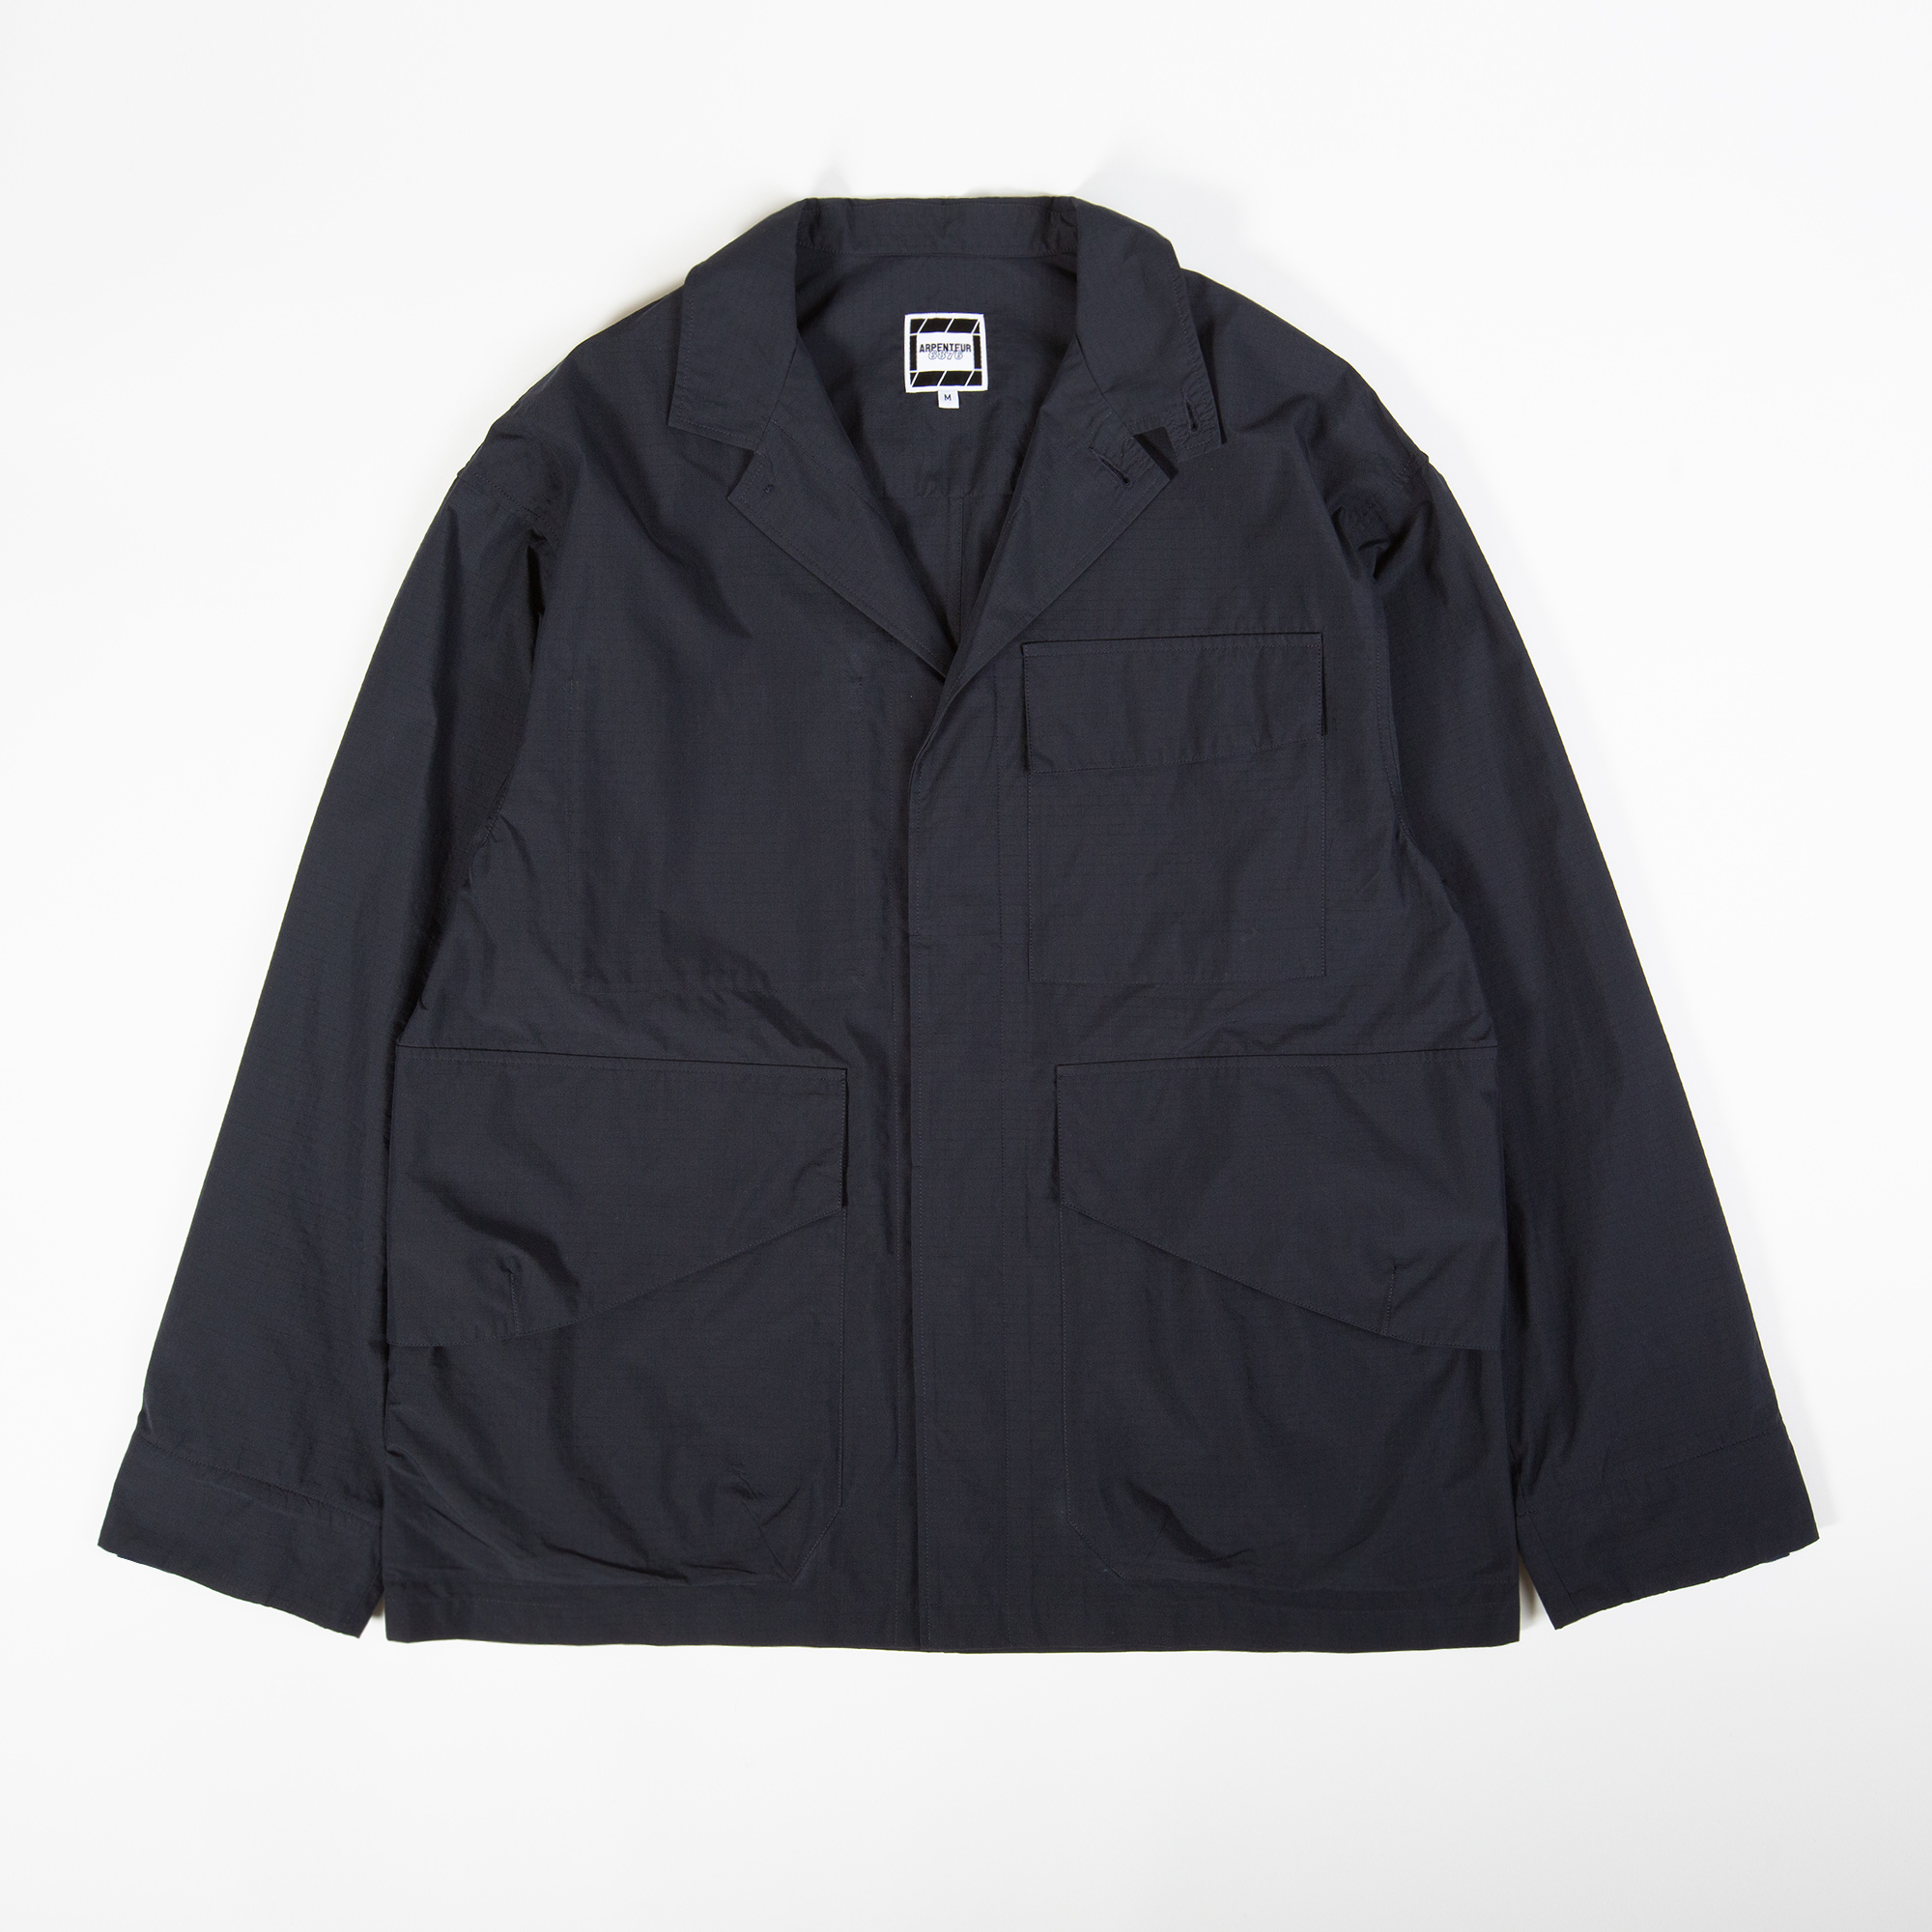 OCEANIC jacket in Navy color by Arpenteur and 6876